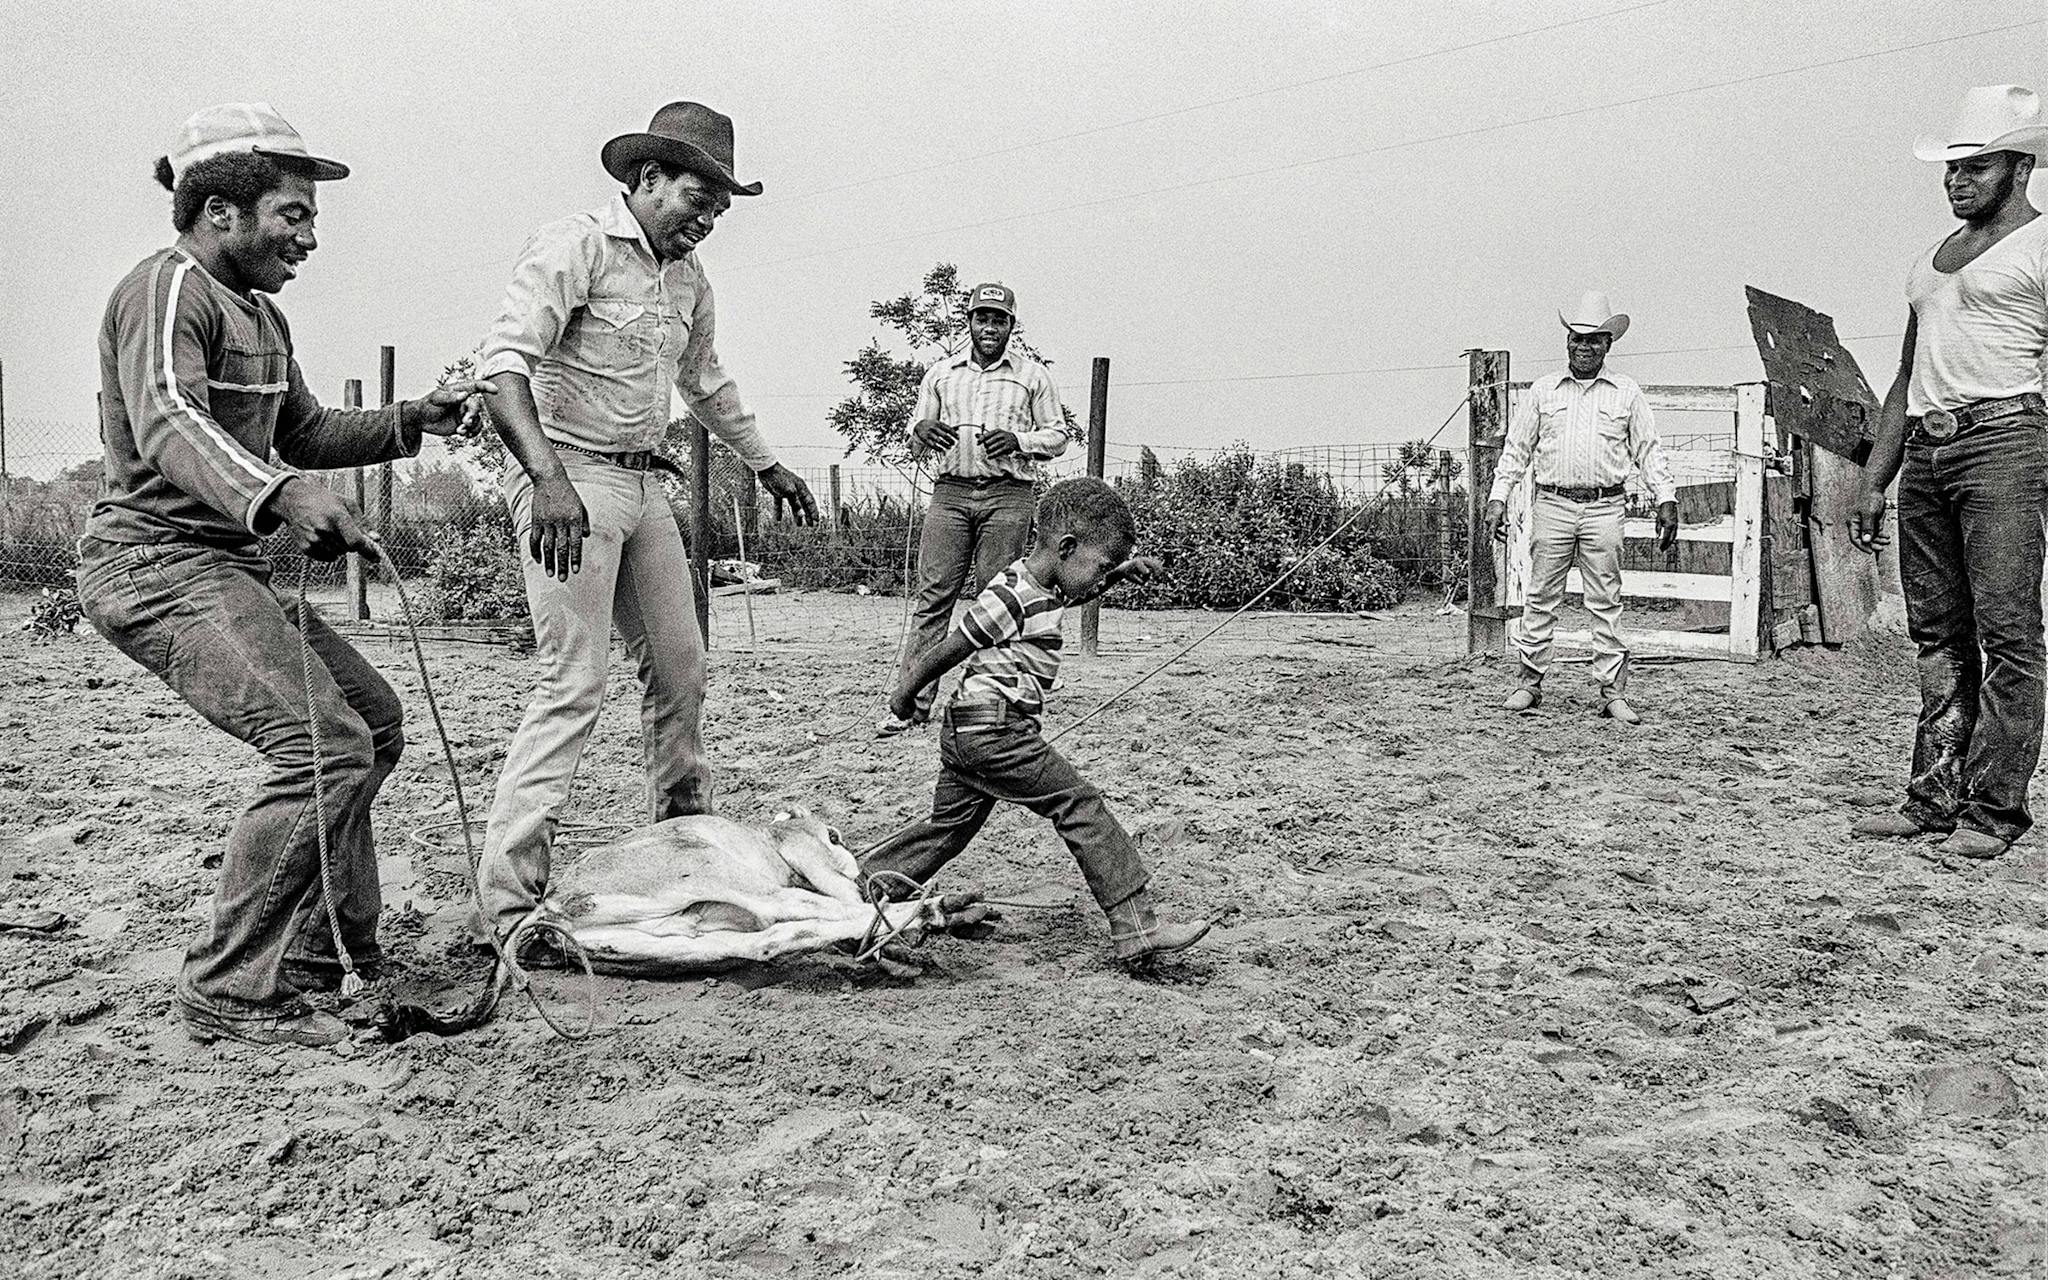 Rufus Green Sr. (far right) teaching his grandson the finer points of tying down a calf, in Hempstead, in 1977.